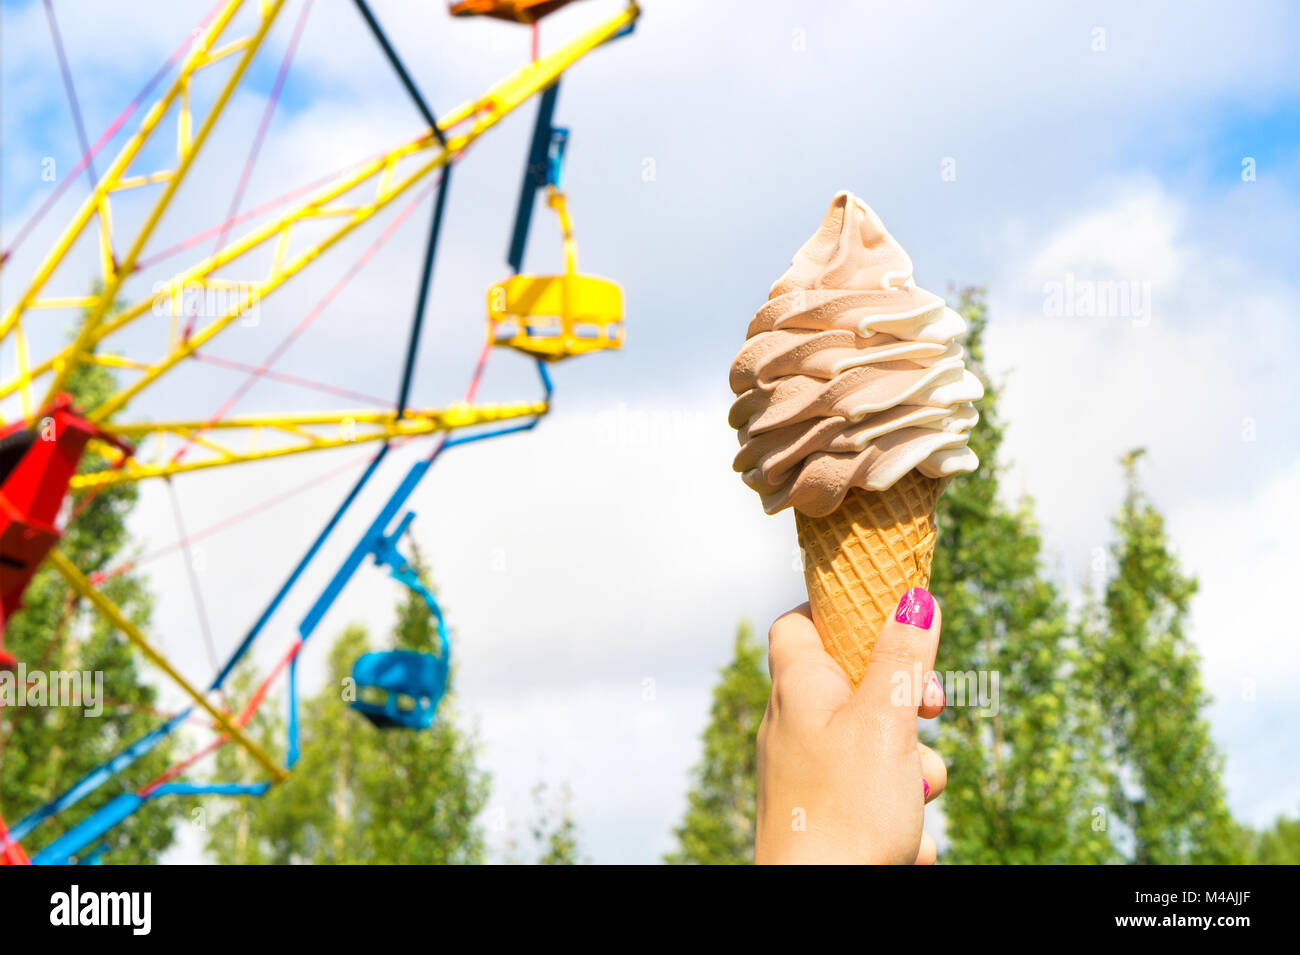 Ice cream in amusement park on a sunny summer day. Girl or young woman holding a cone of soft ice with a colorful theme park ride in the background. Stock Photo